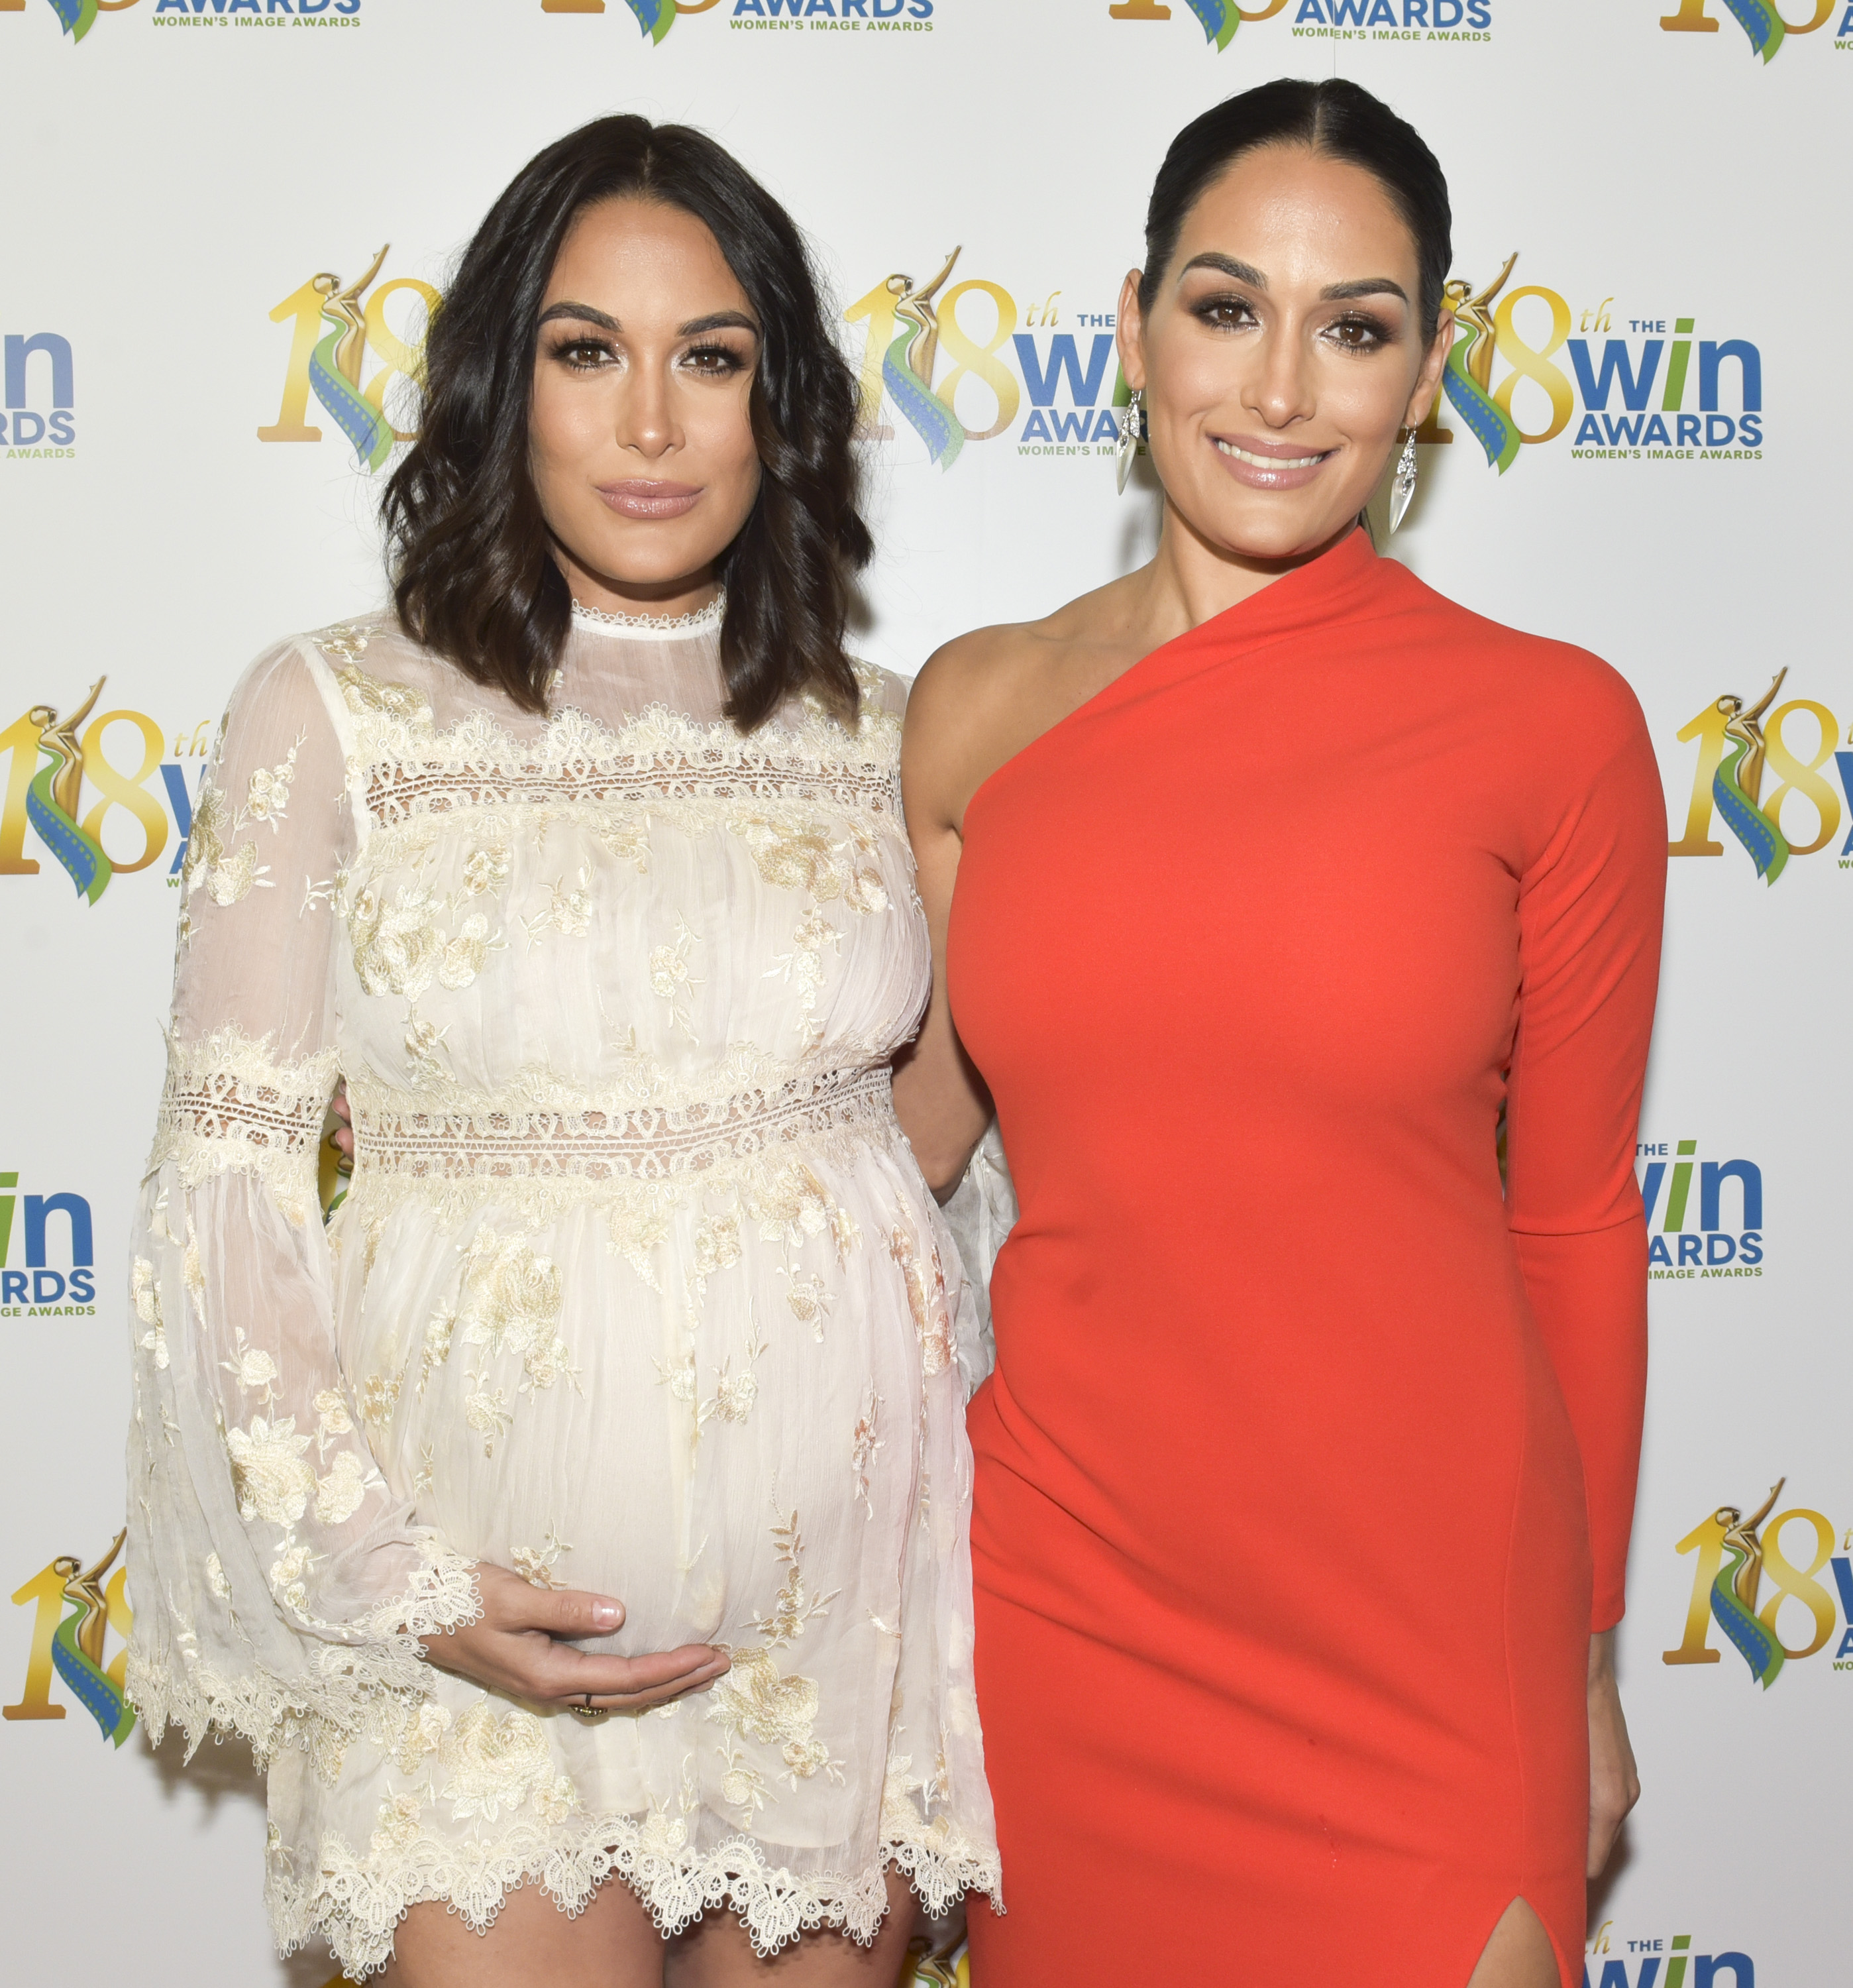 The Bella Twins Image Awards #5